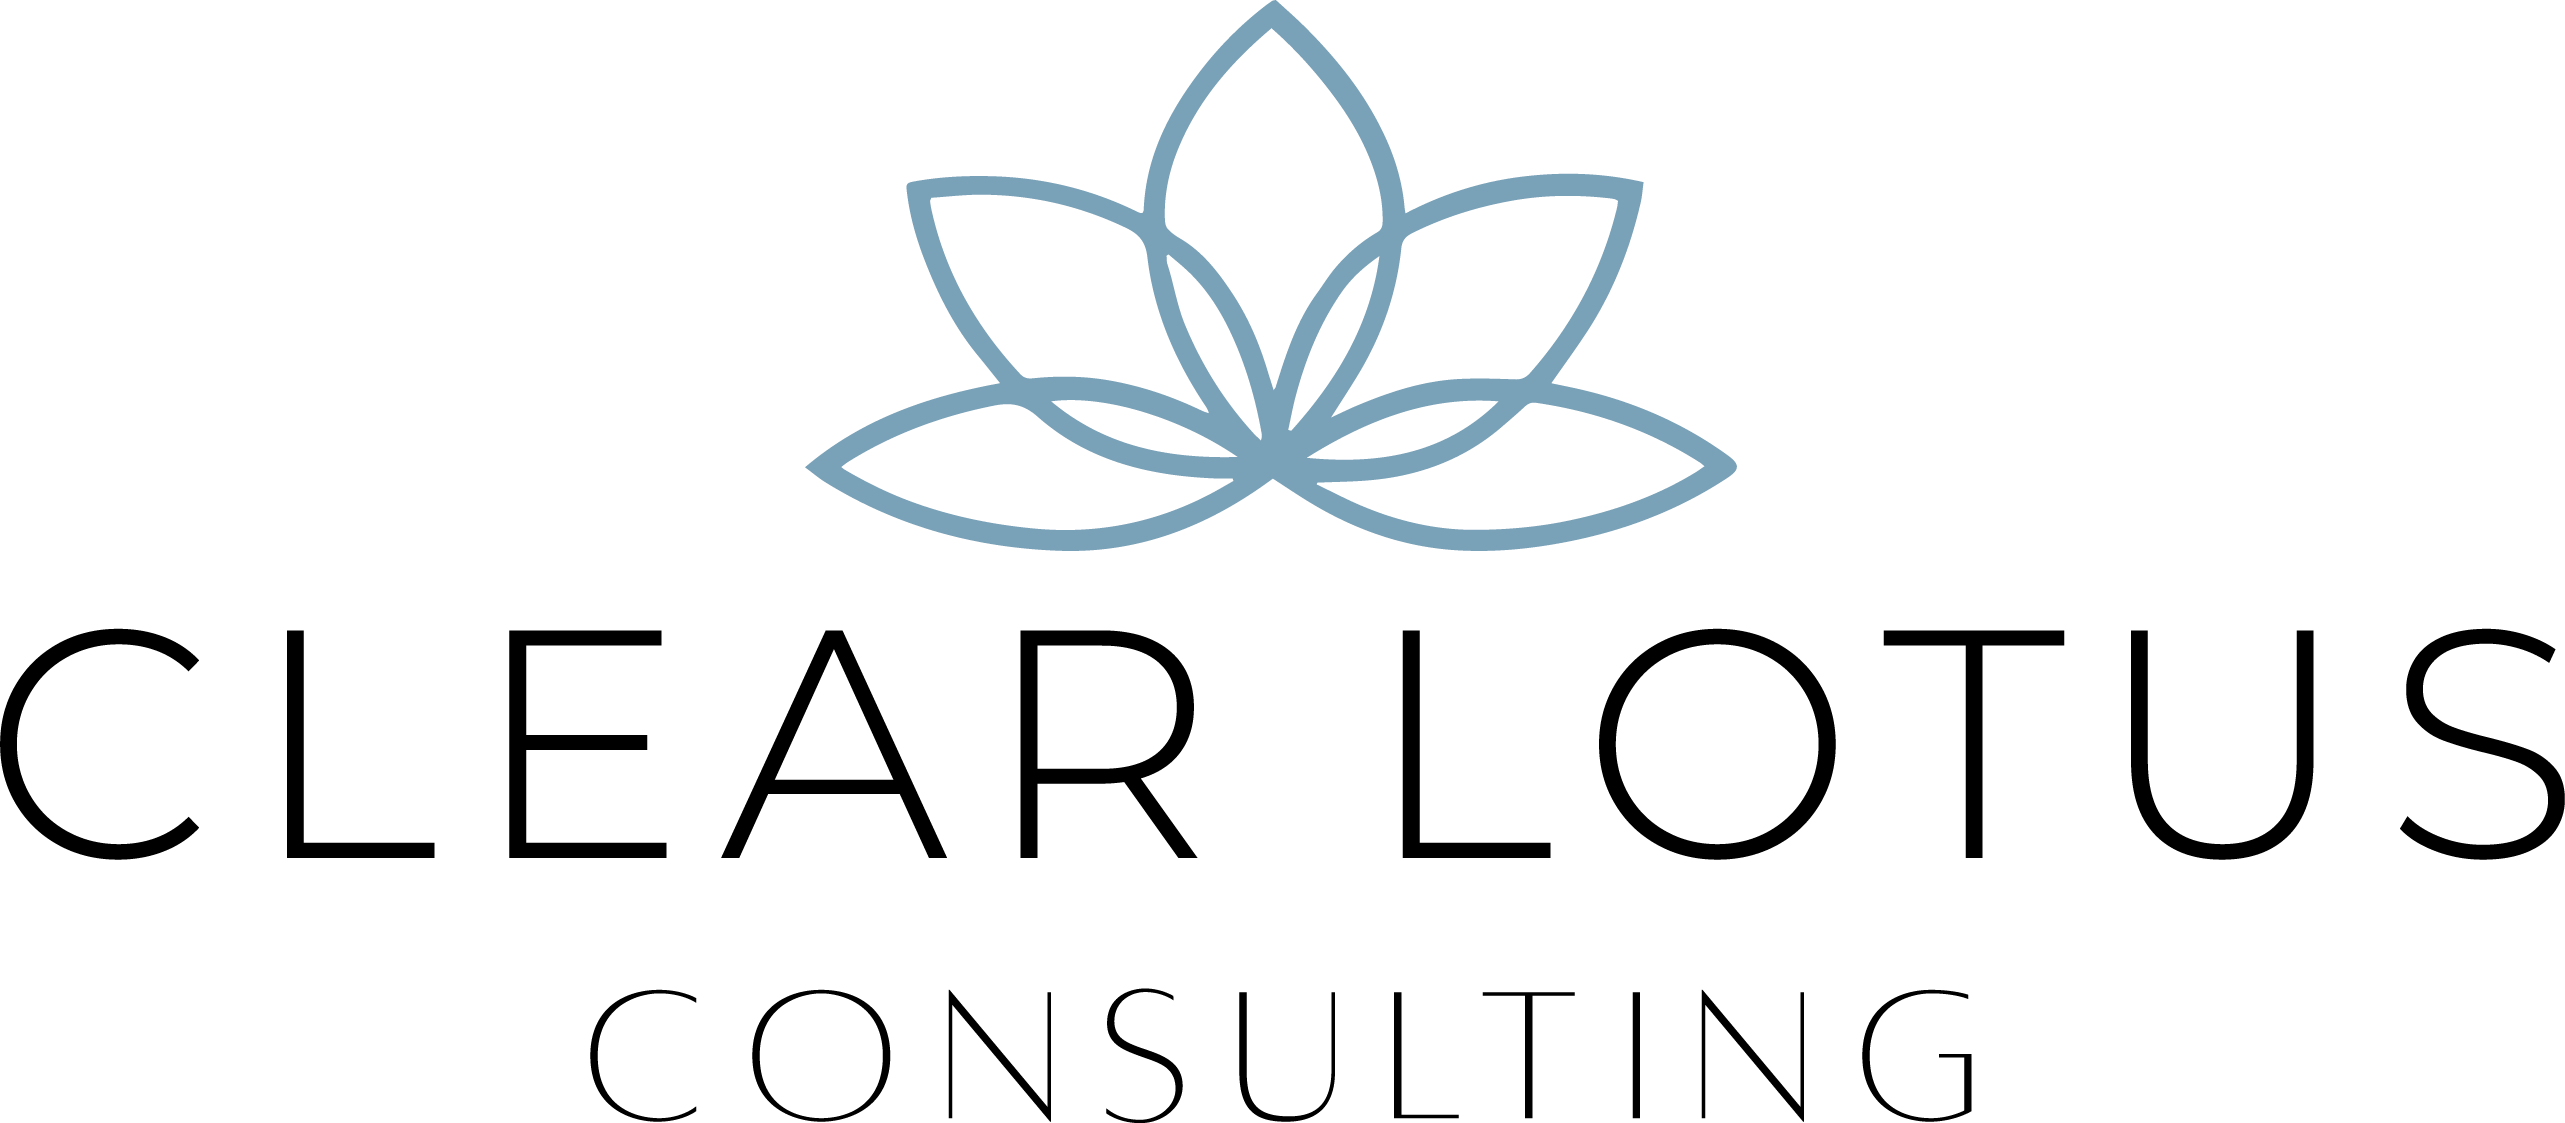 Clear Lotus Consulting logo